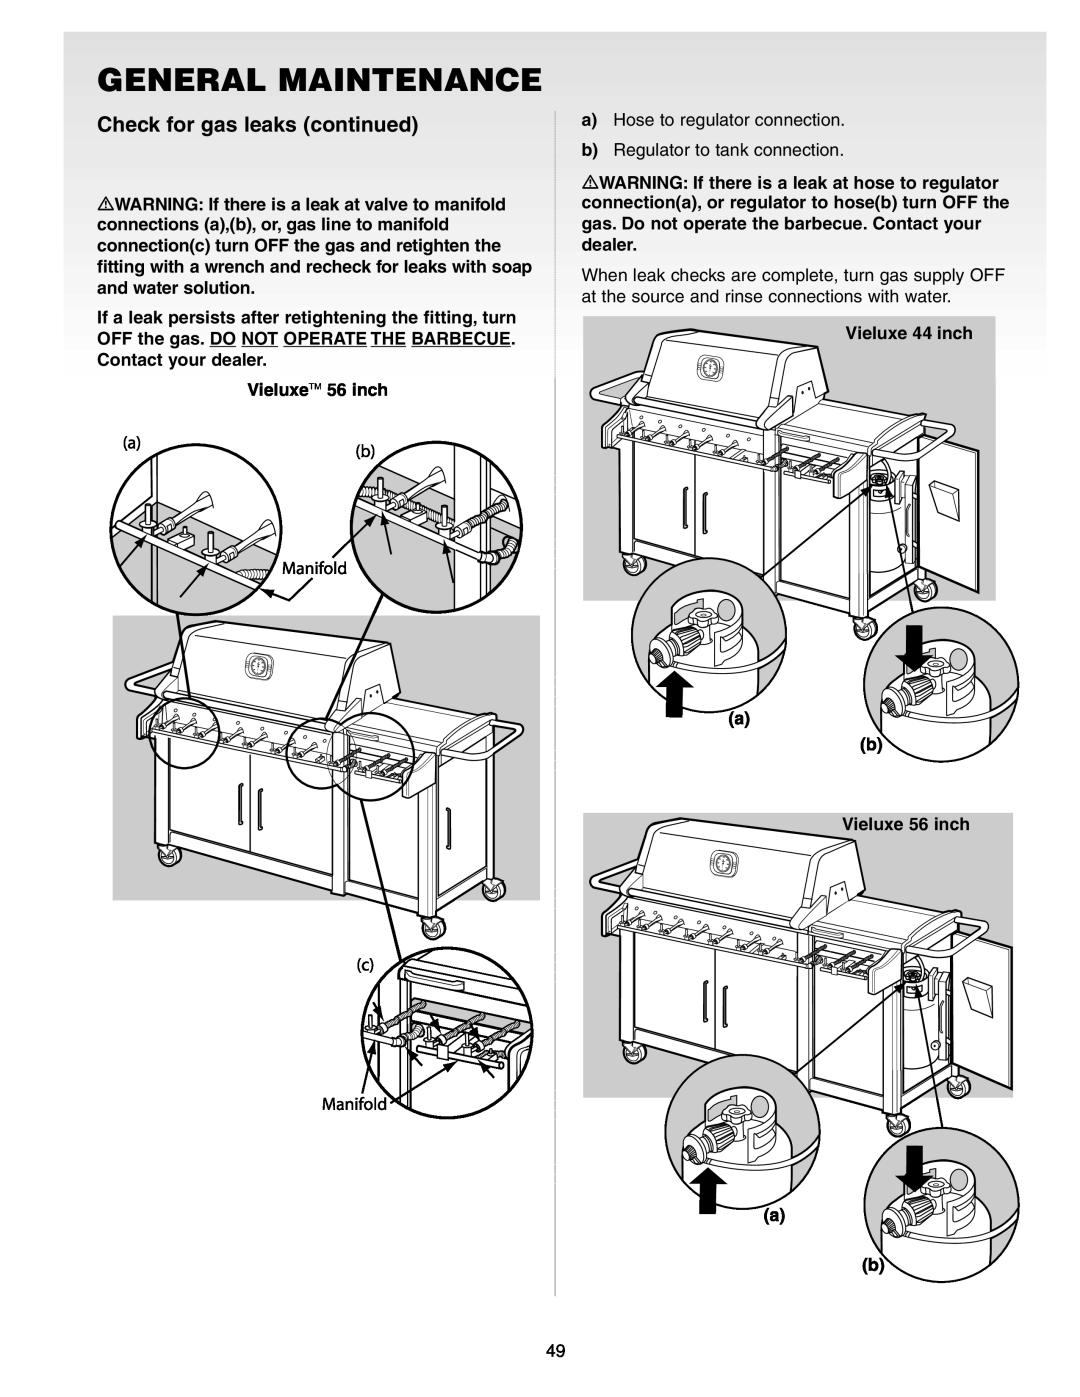 Weber Gas Burner manual General Maintenance, Check for gas leaks continued 